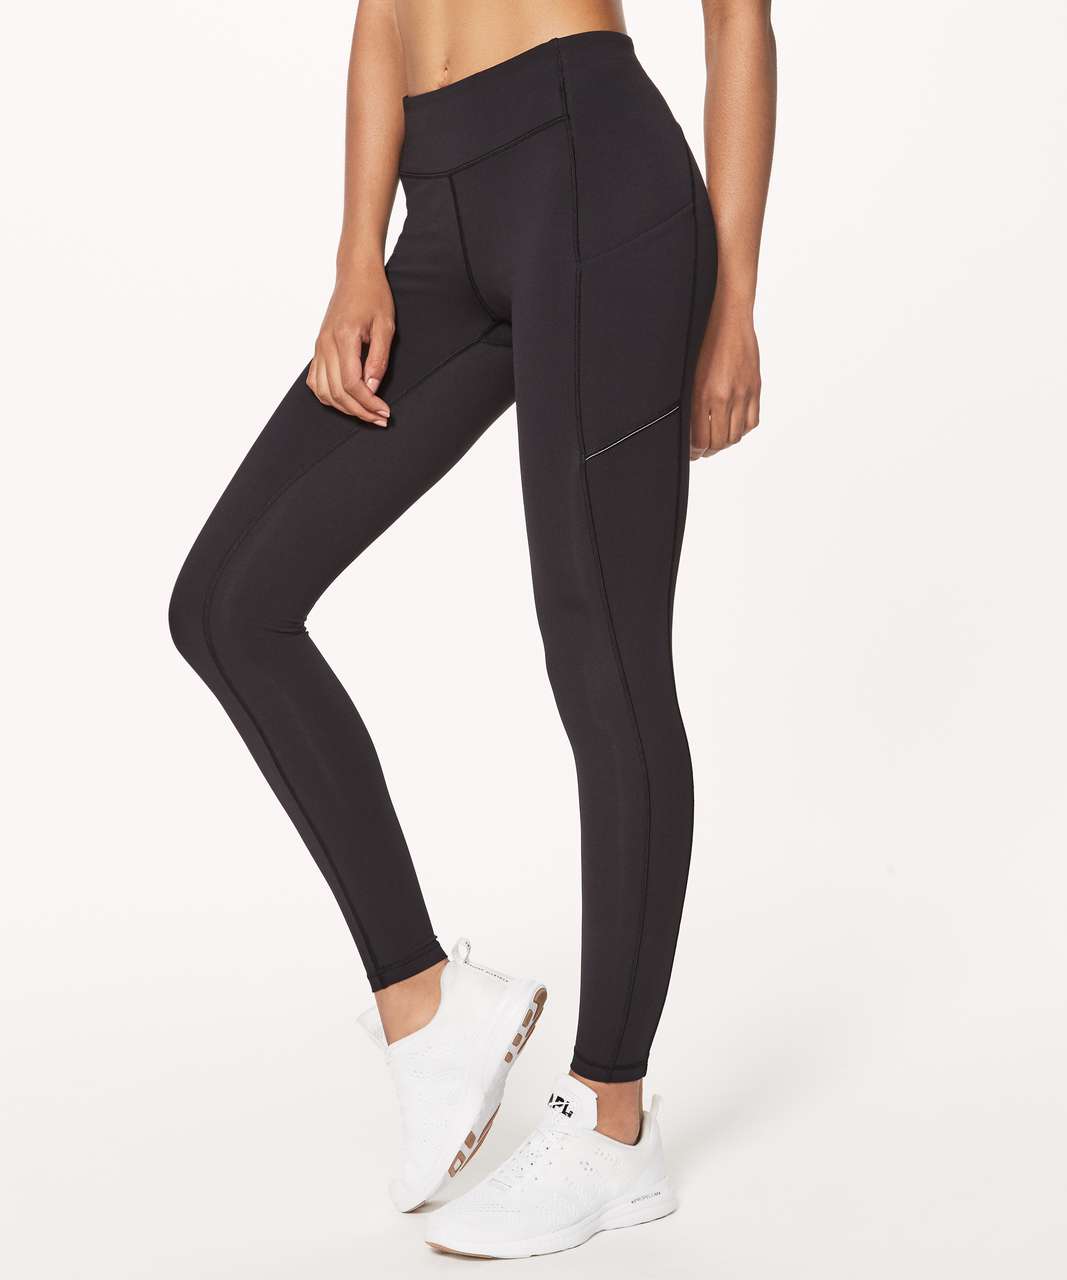 Lululemon Speed Up Tight *Full-On Luxtreme 28" - Black (First Release)